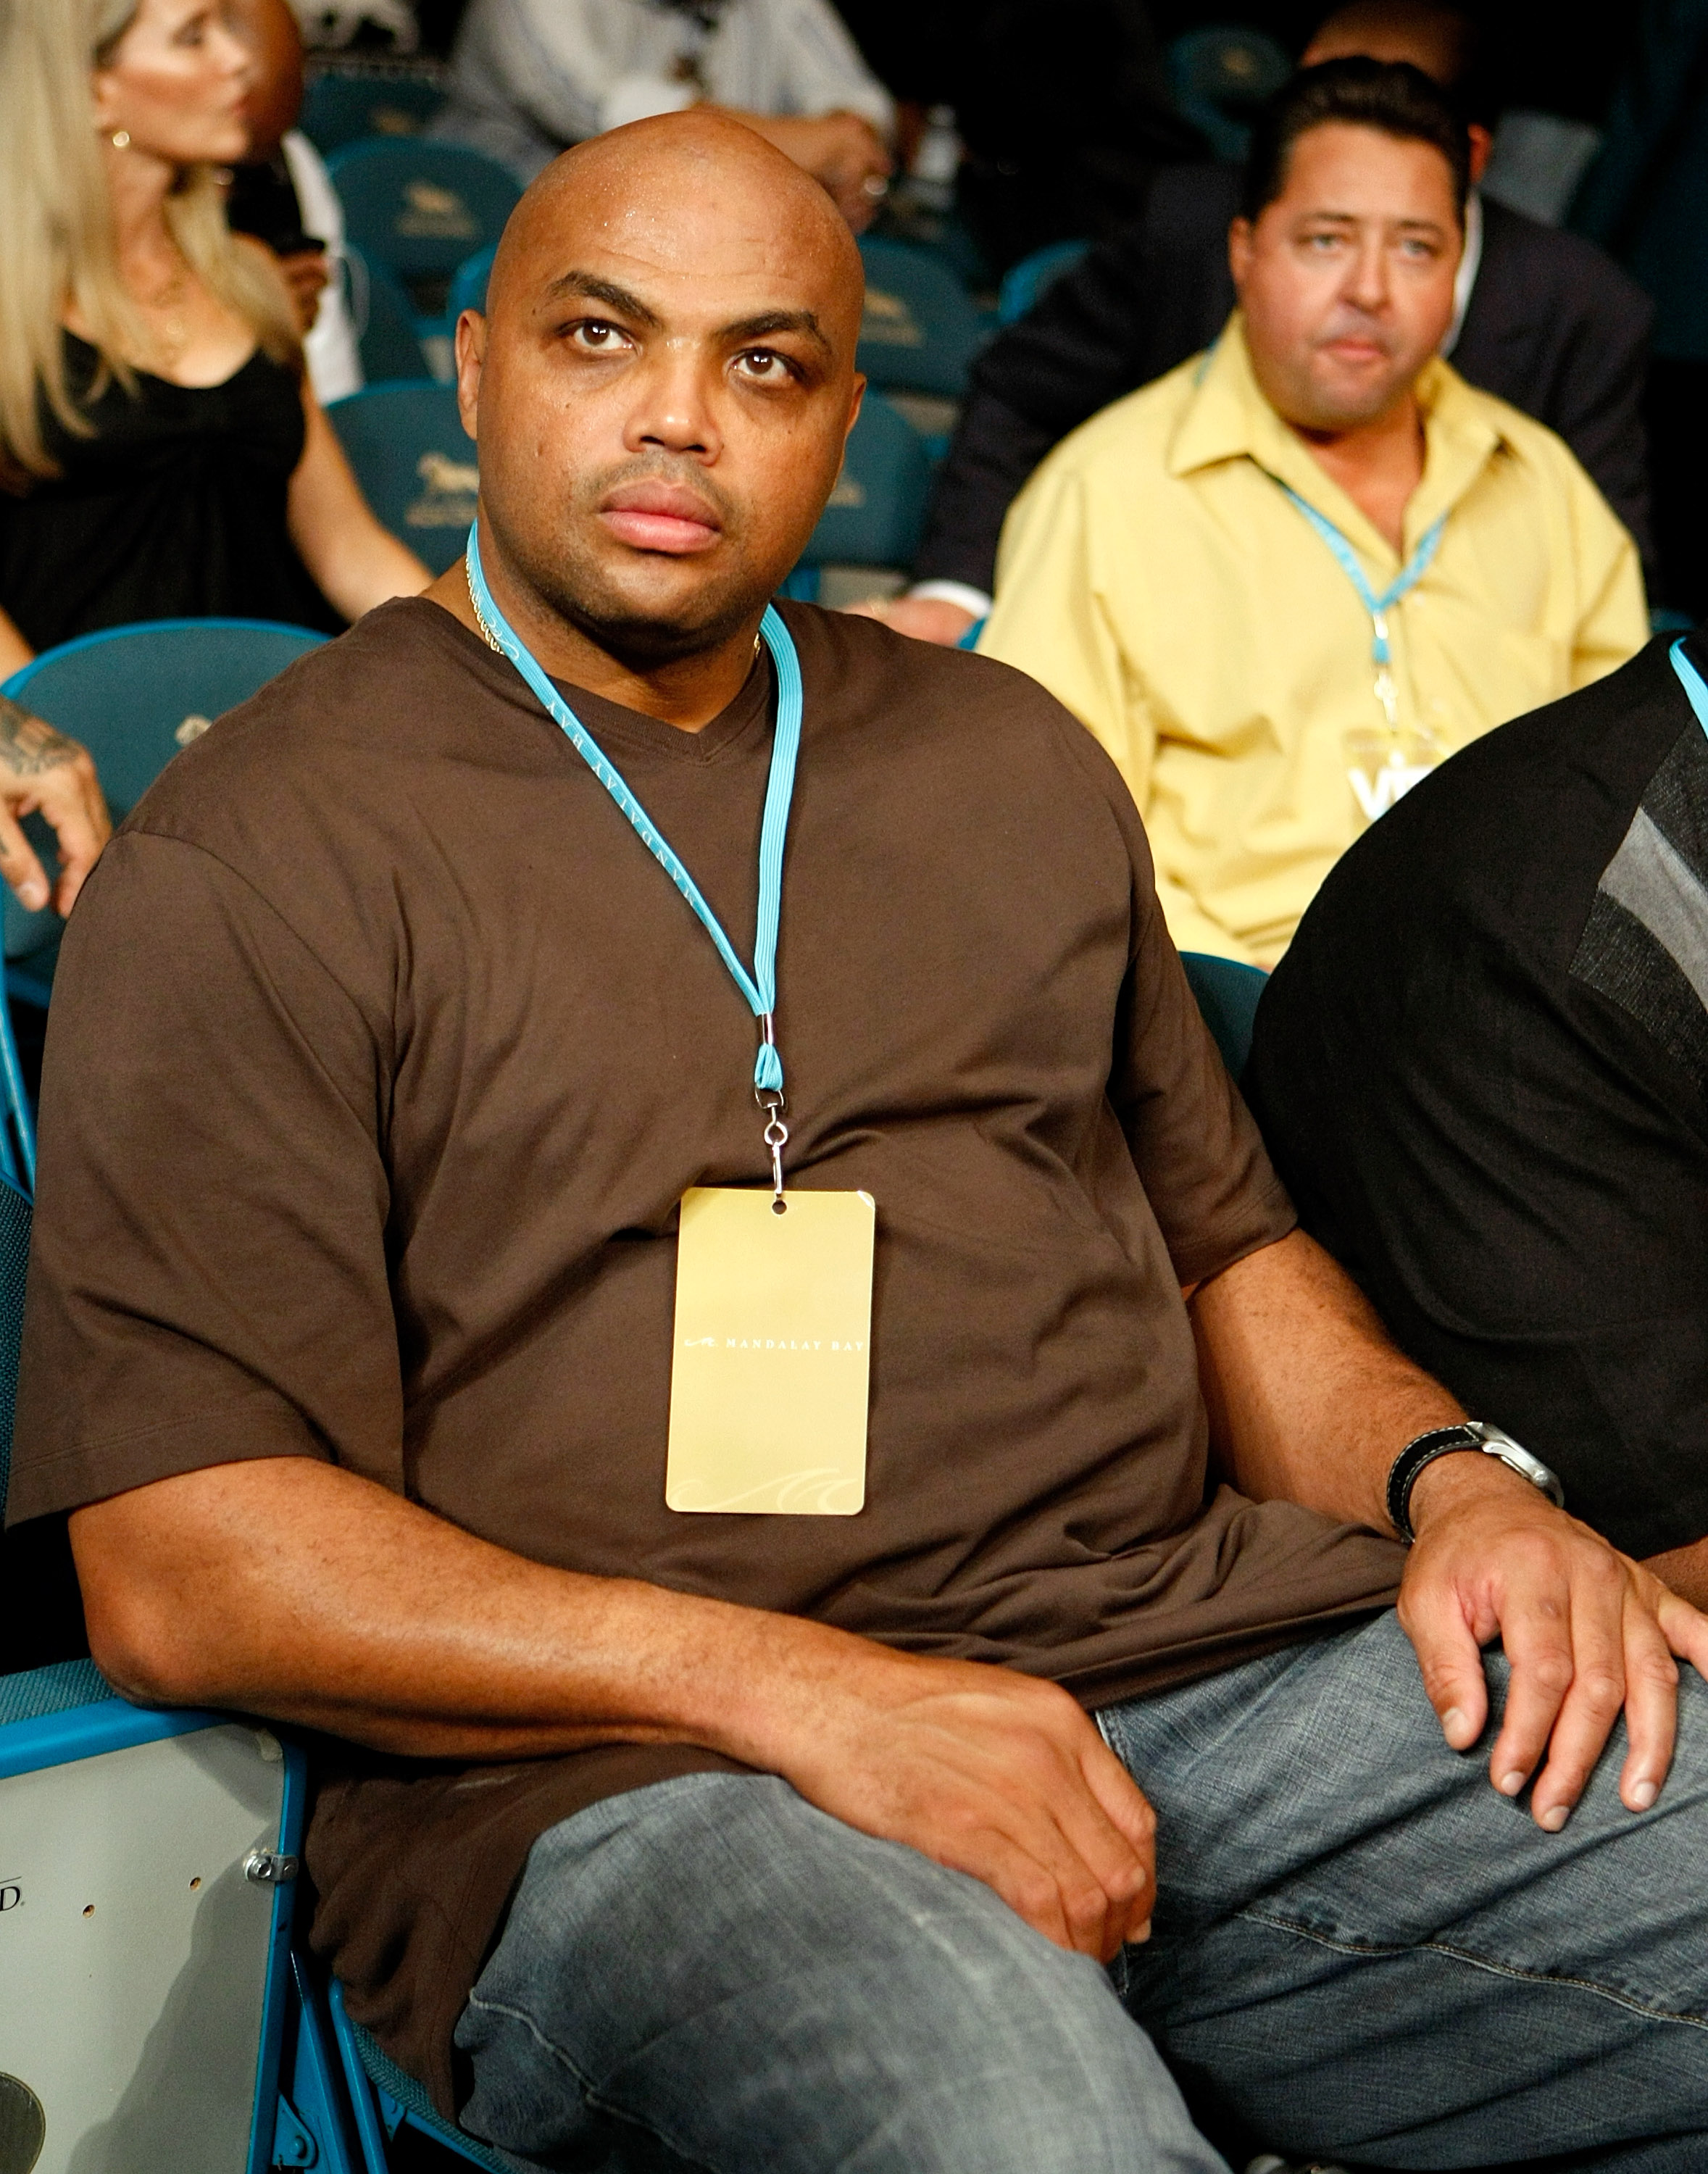 LAS VEGAS - SEPTEMBER 19:  NBA analyst and former NBA player Charles Barkley watches an undercard fight at the Floyd Mayweather Jr. and Juan Manuel Marquez bout at the MGM Grand Garden Arena September 19, 2009 in Las Vegas, Nevada.  (Photo by Ethan Miller